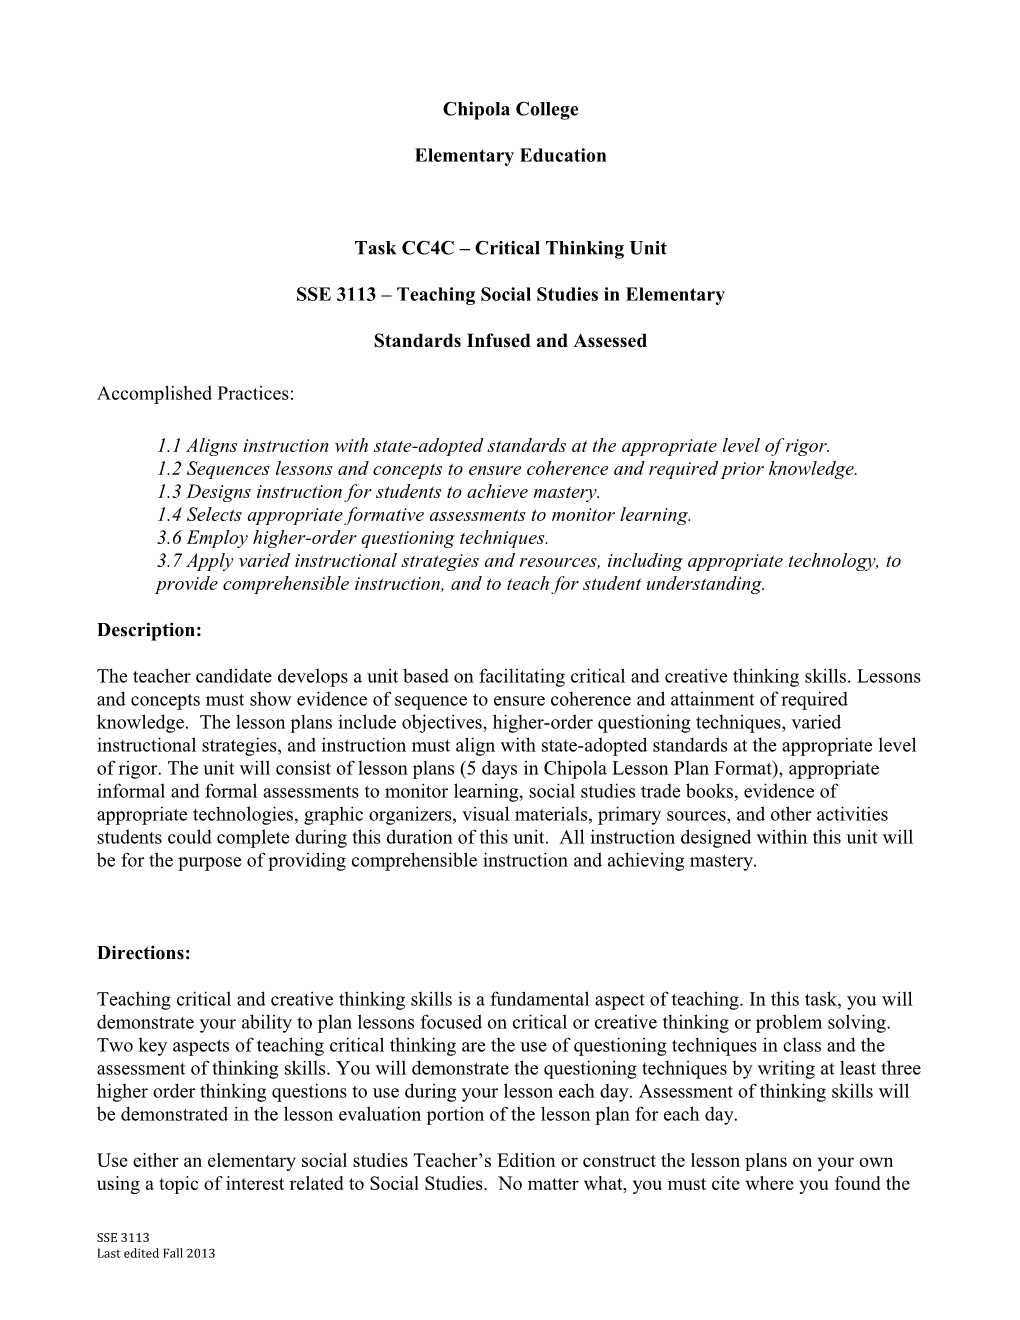 Critical Thinking - Assessment System Product/Performance Tasks